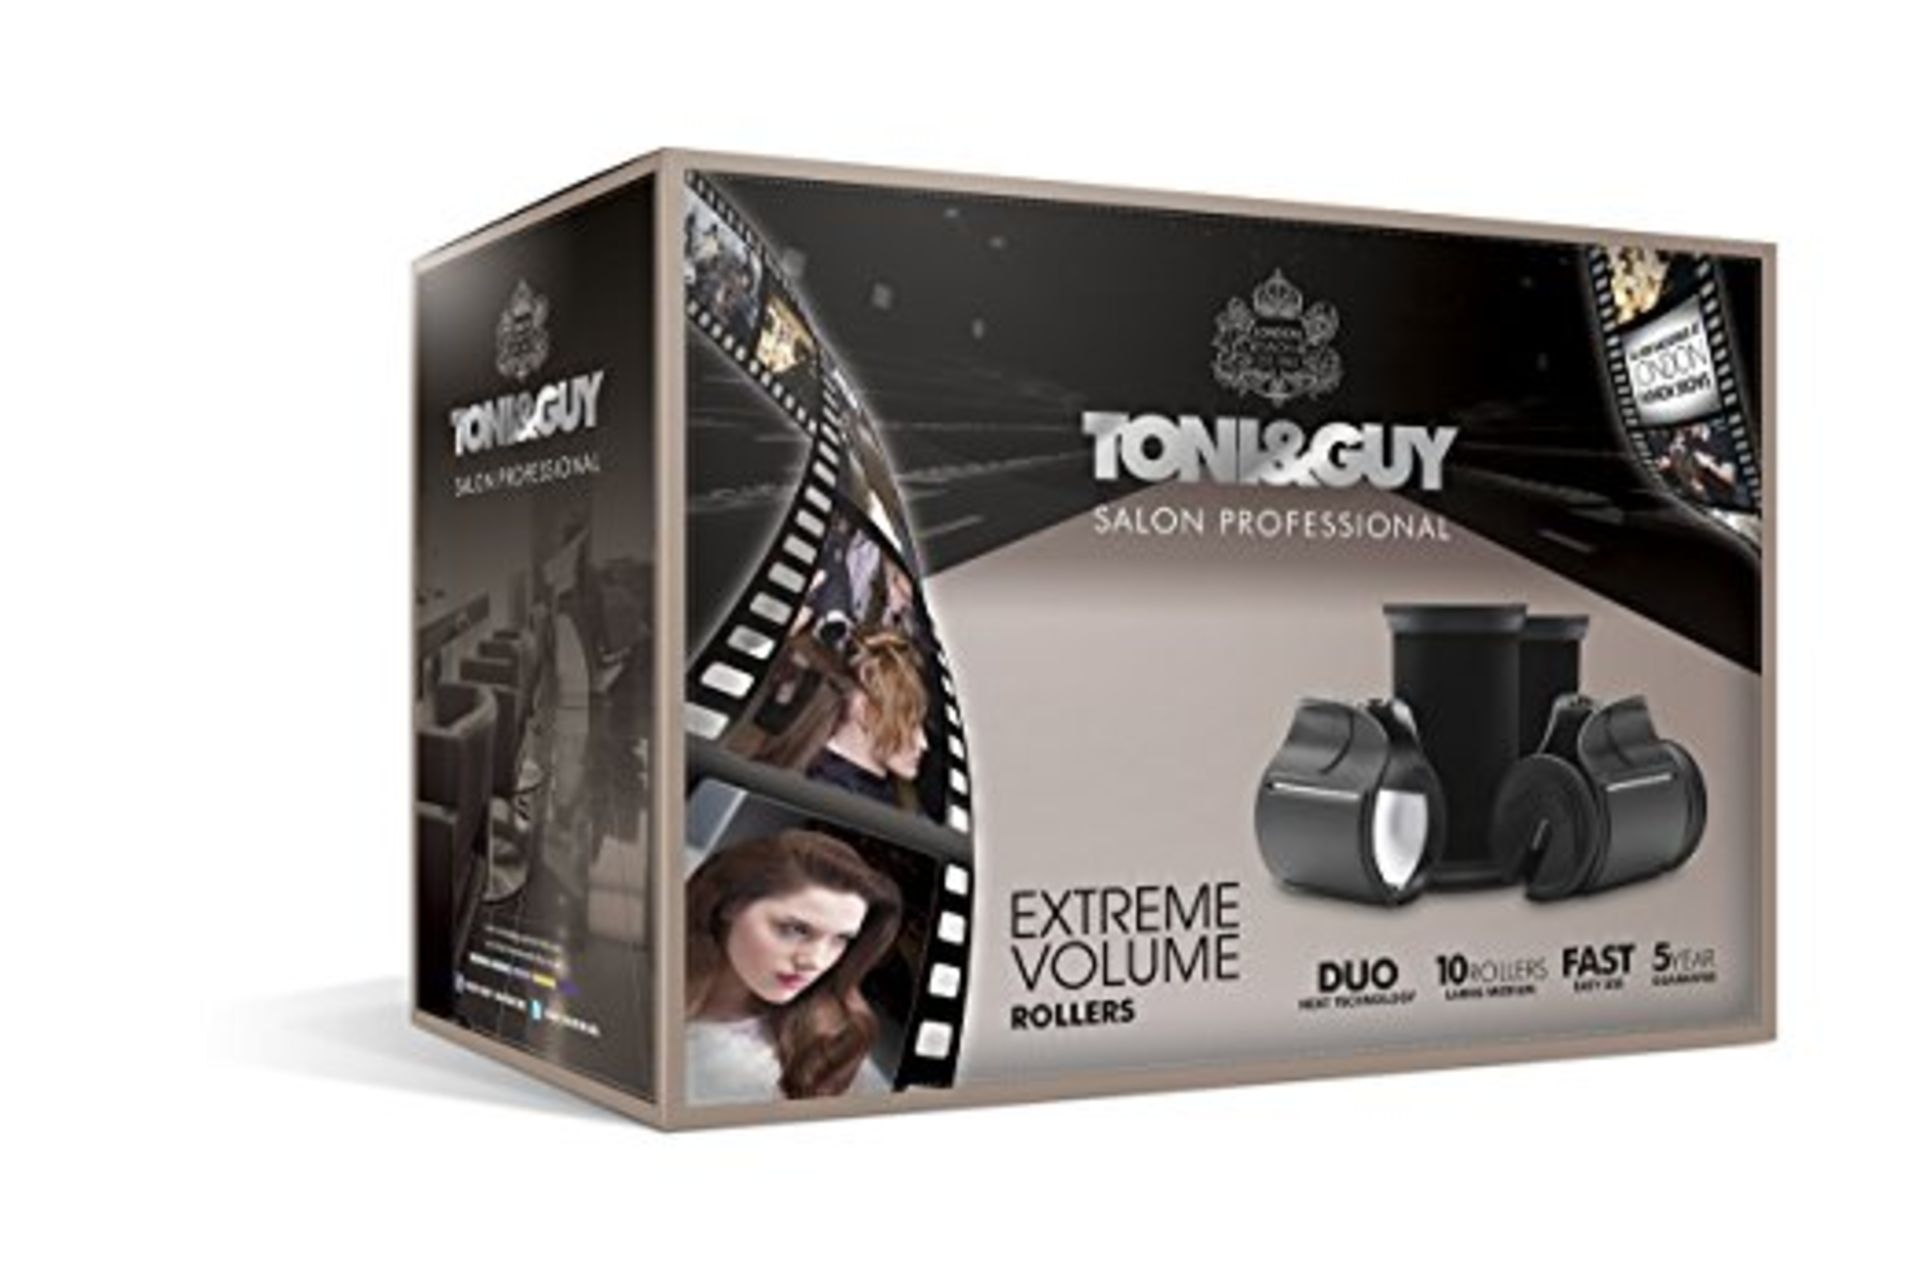 V Brand New Toni & Guy Salon Professional Extreme Volume Heated Rollers With Unique Duo Heat - Image 2 of 2